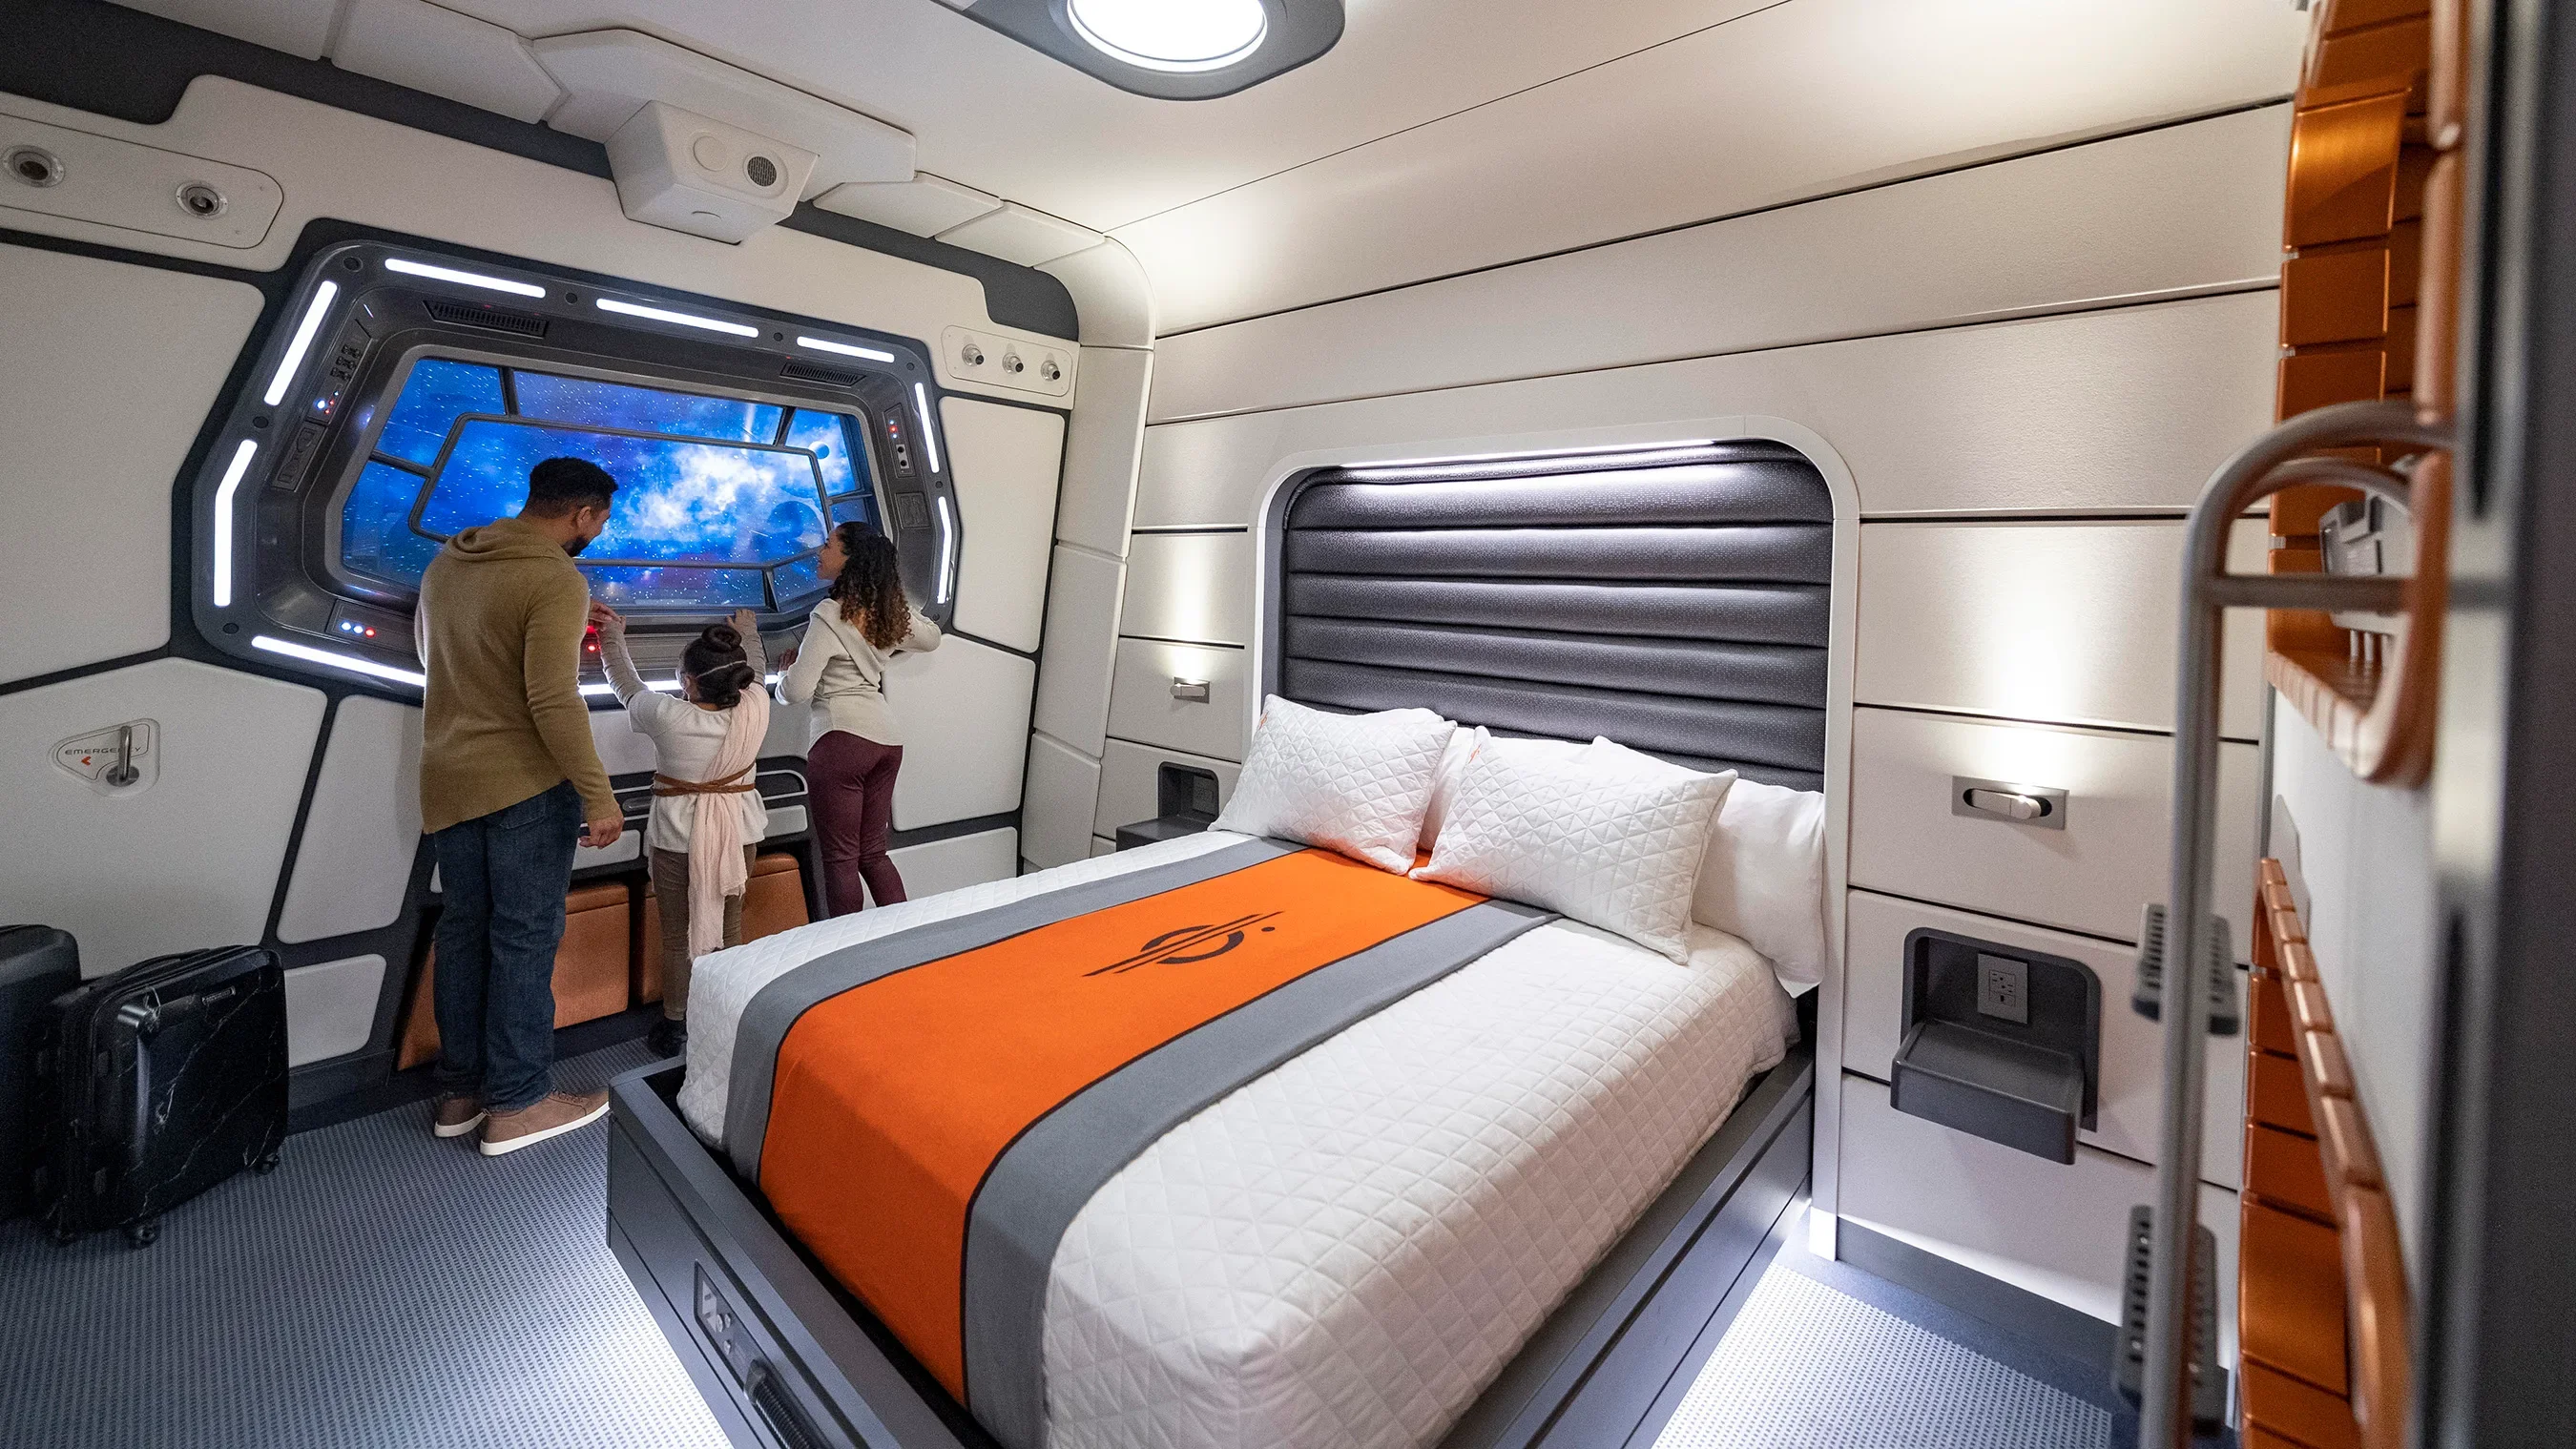 A family room on Star Wars Galactic Starcruiser